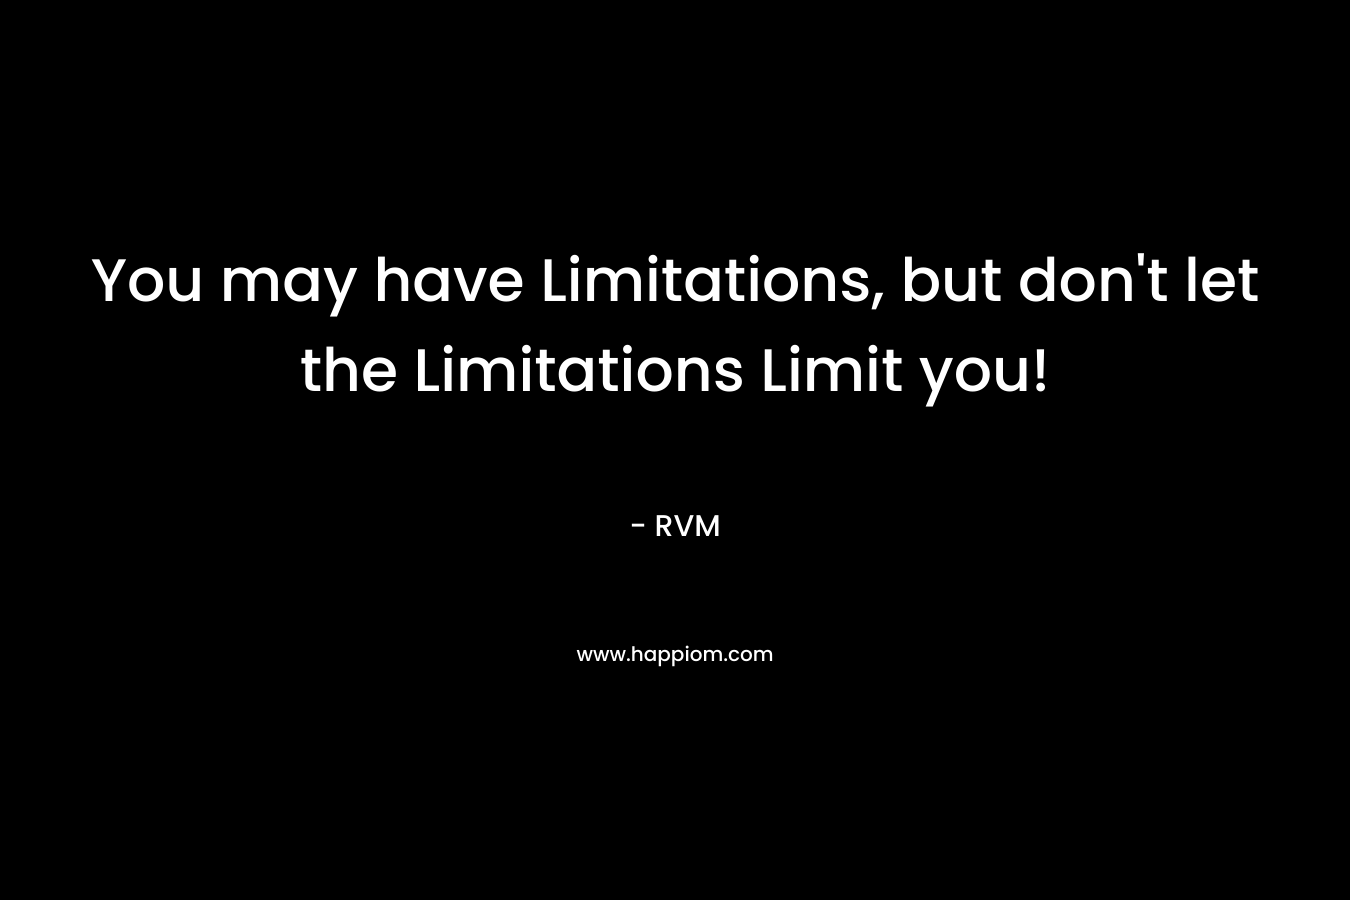 You may have Limitations, but don't let the Limitations Limit you!